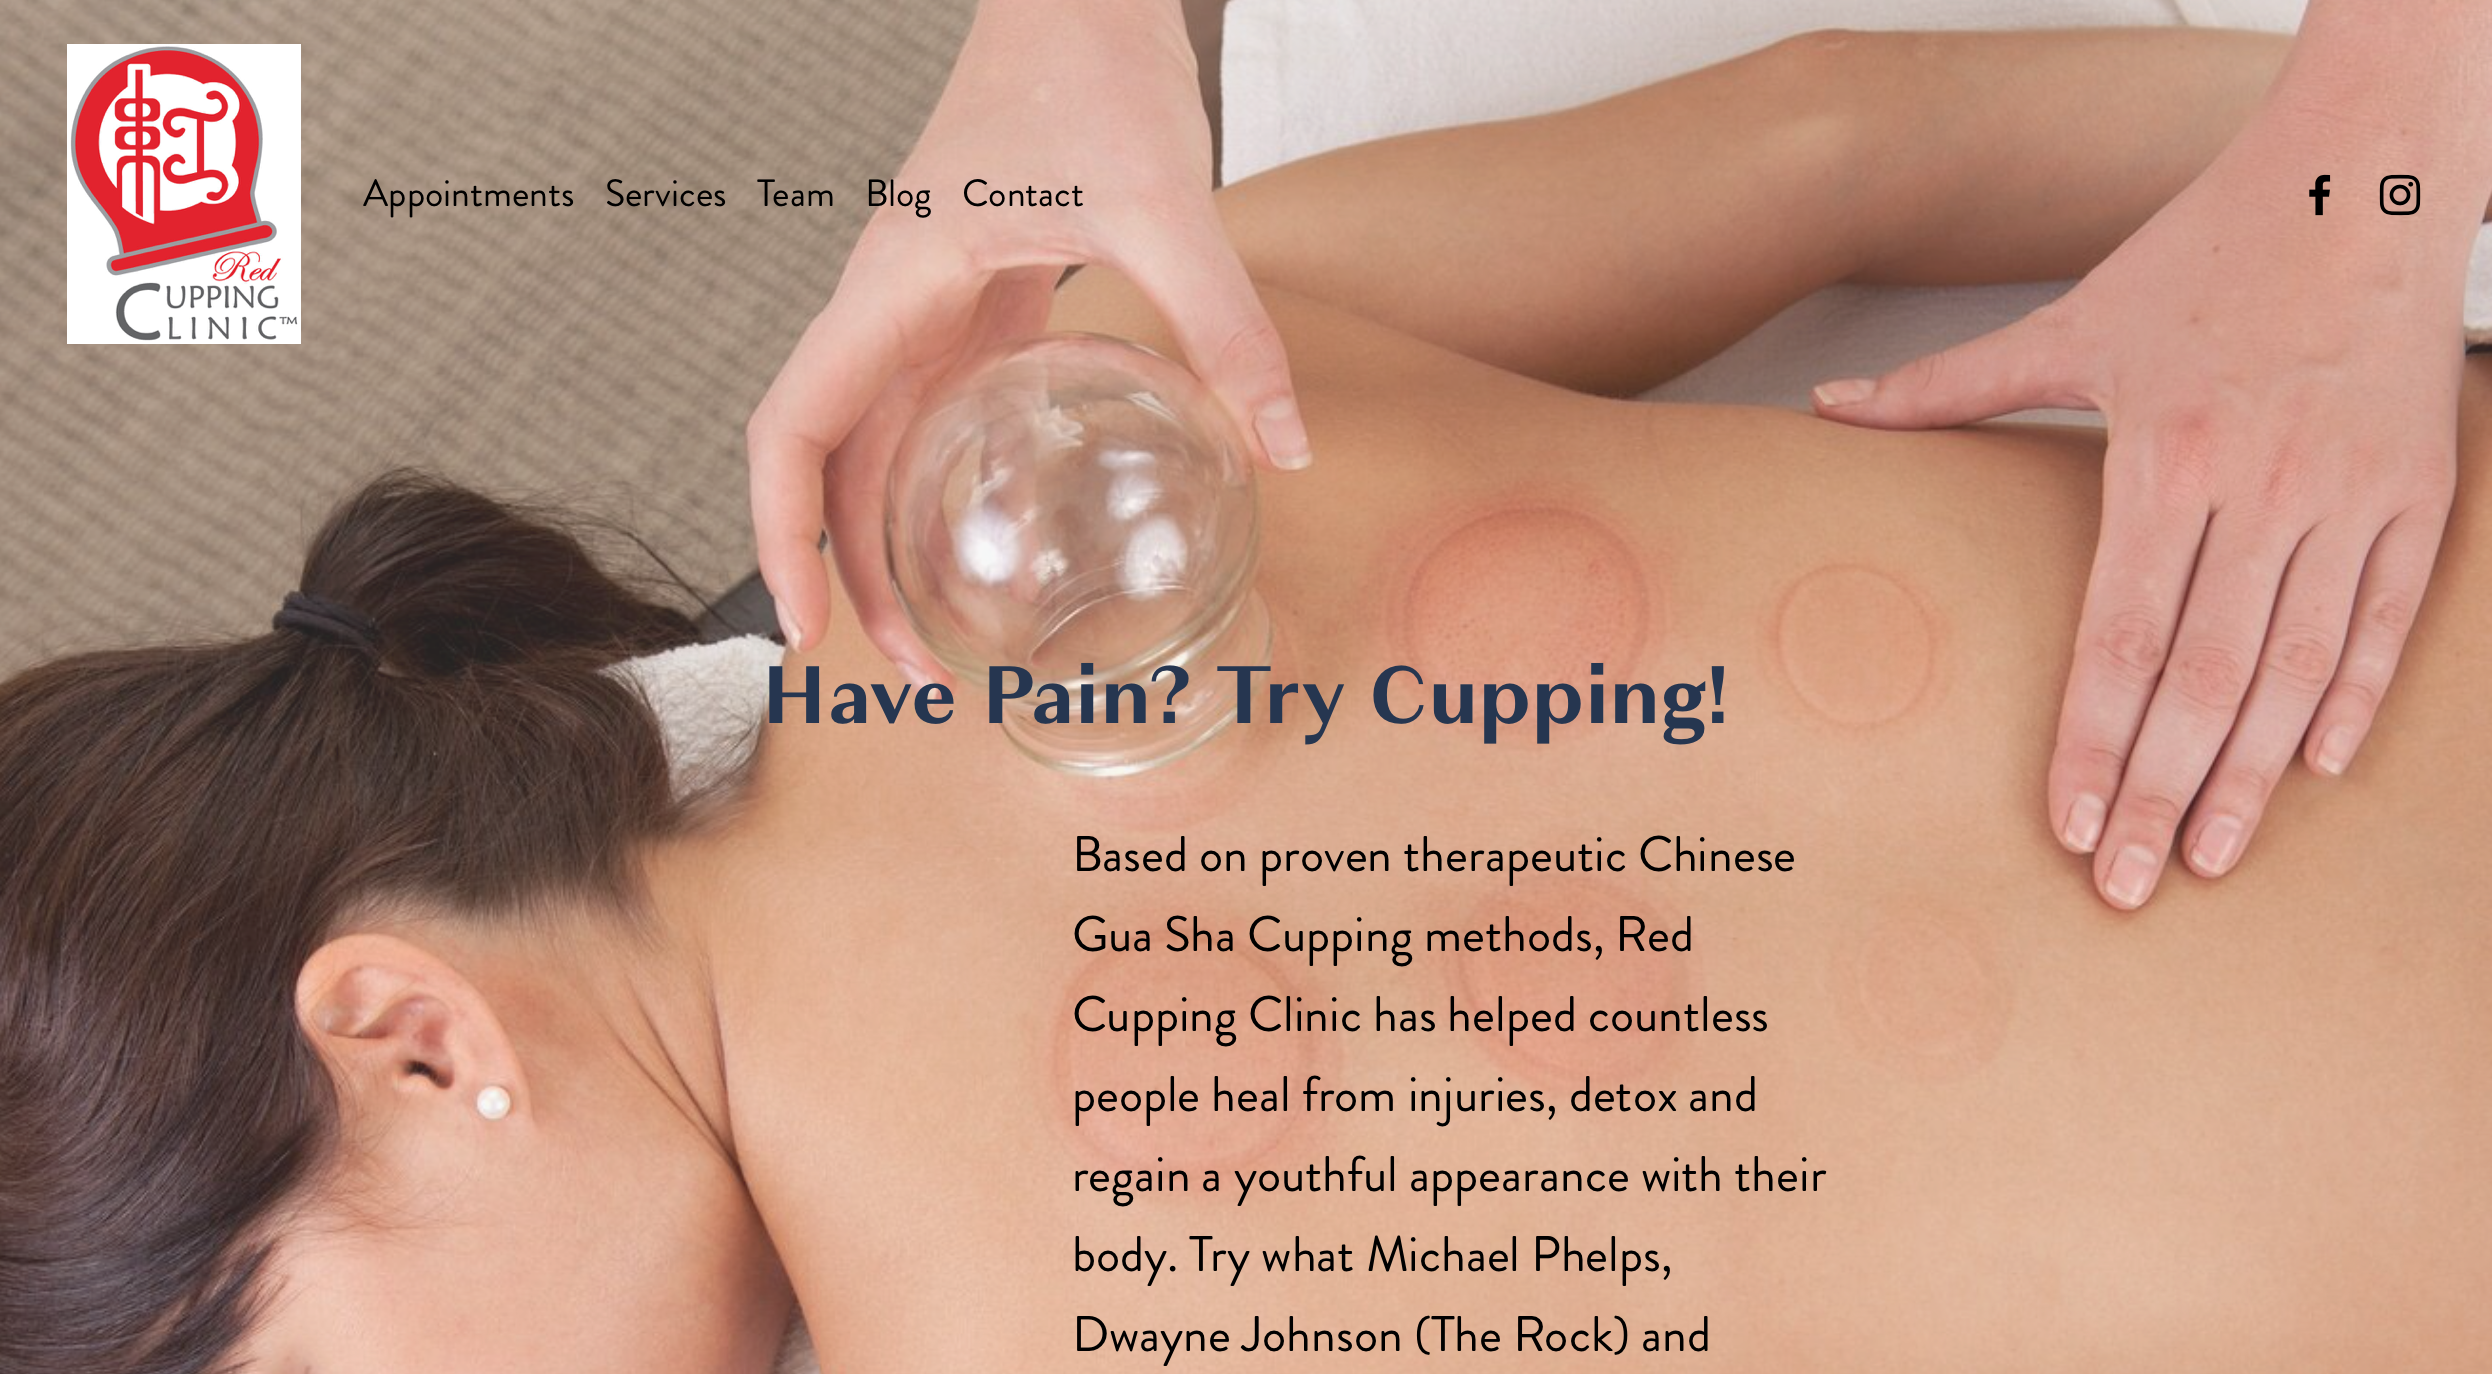 Cupping.clinic homepage.png